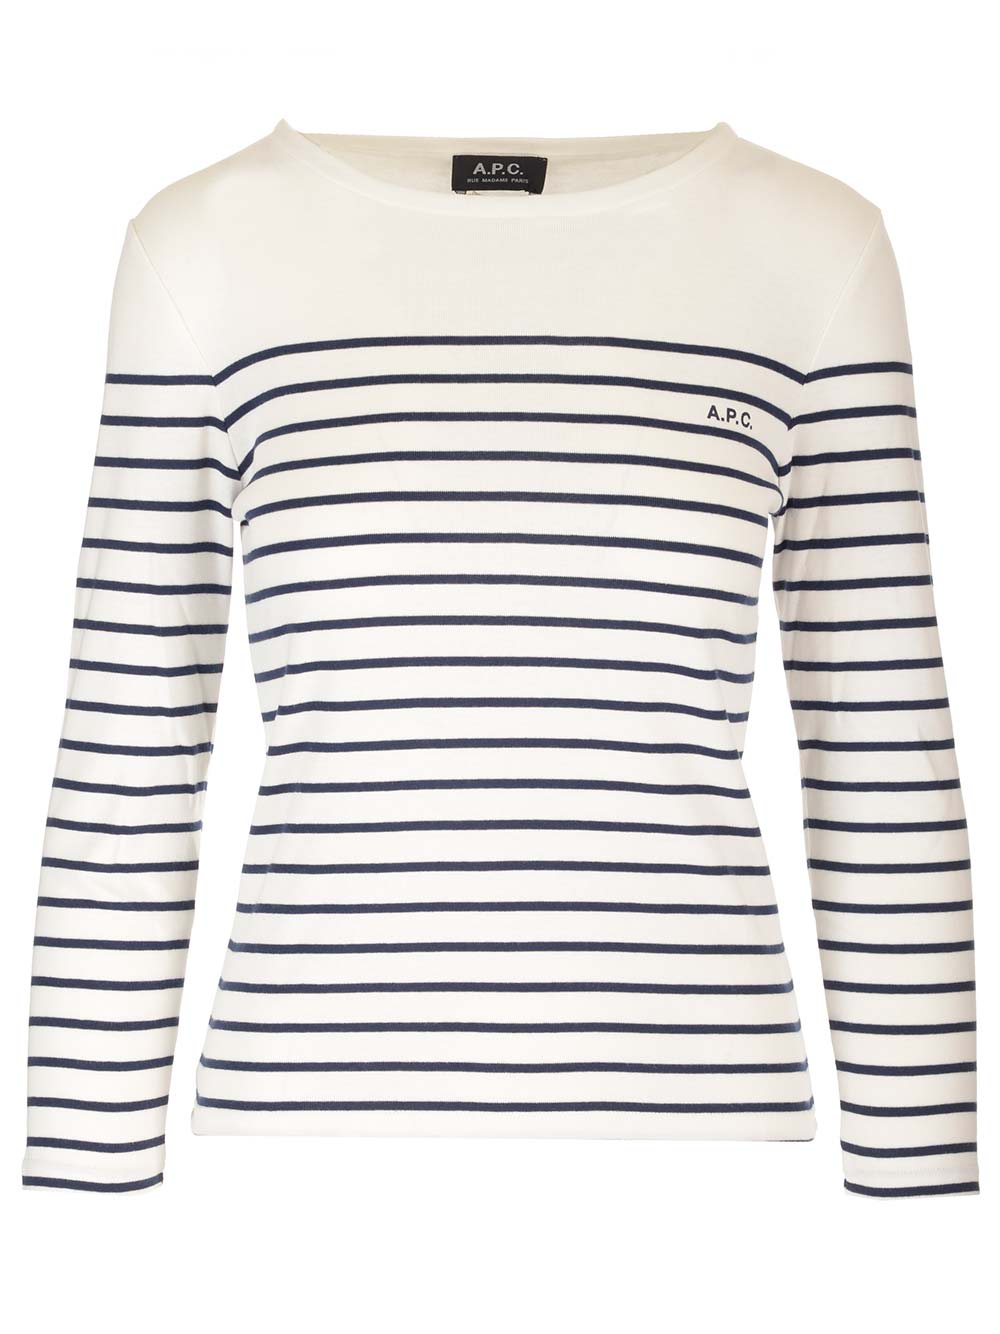 thelma Striped Top